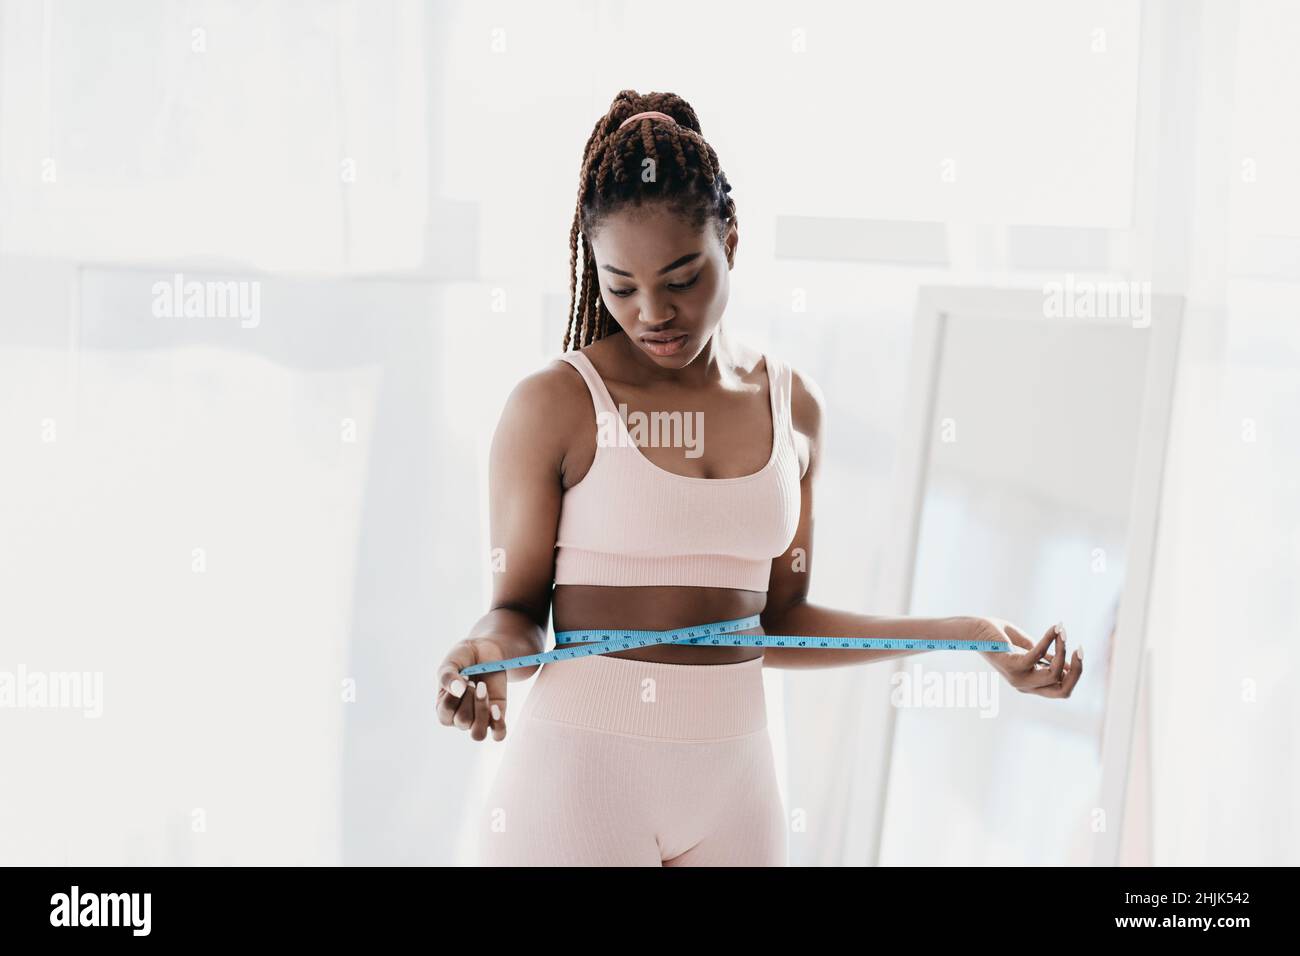 https://c8.alamy.com/comp/2HJK542/unhappy-young-black-woman-measuring-waist-with-tape-feeling-upset-with-results-of-slimming-diet-not-losing-weight-2HJK542.jpg